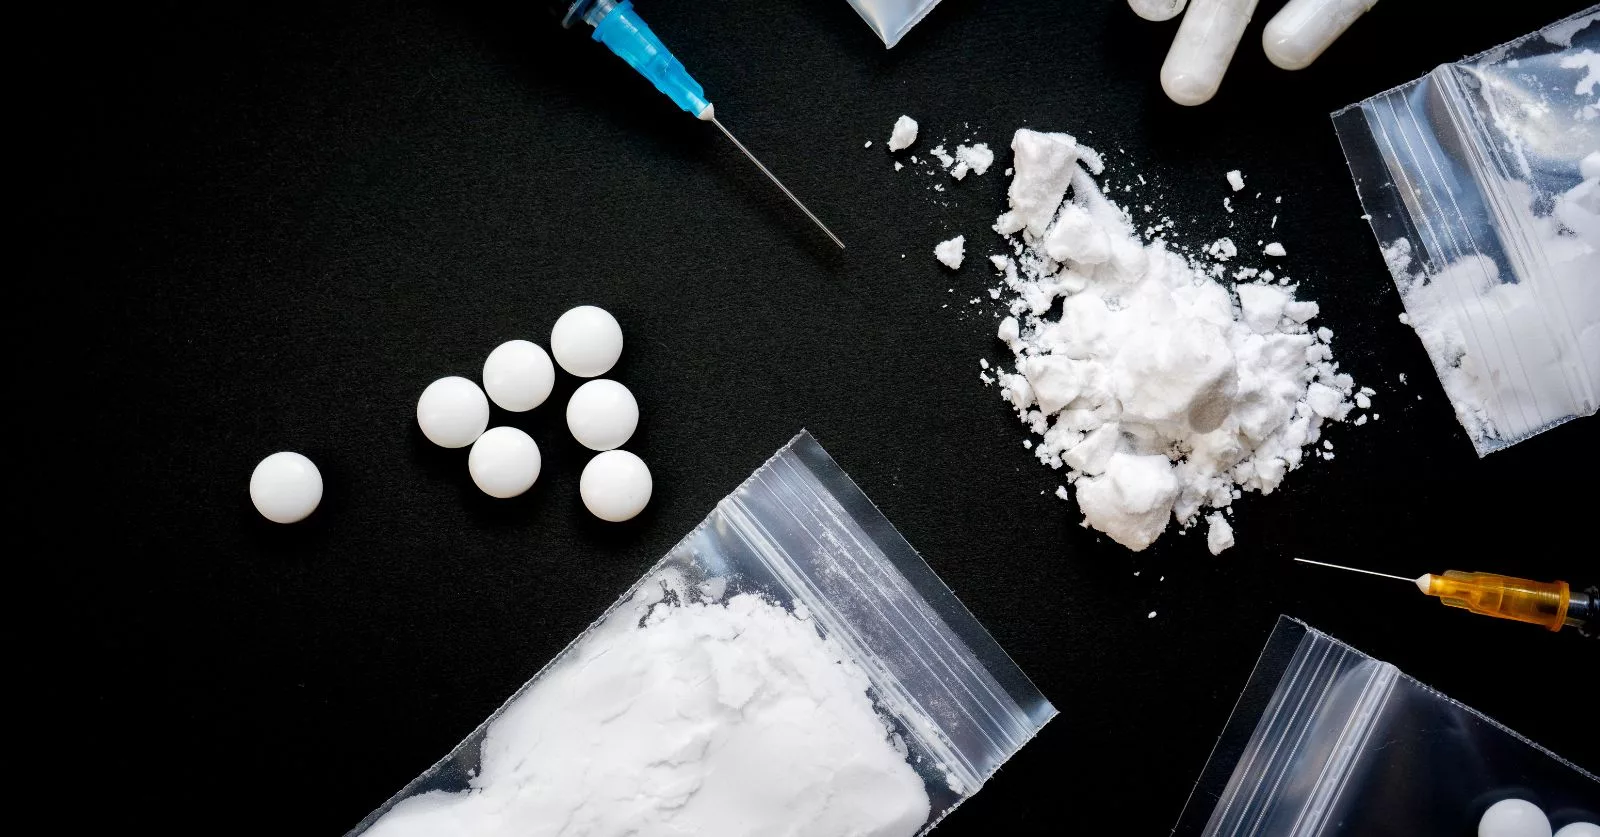 Research reveals alarming opioid overdose risk for recently released inmates